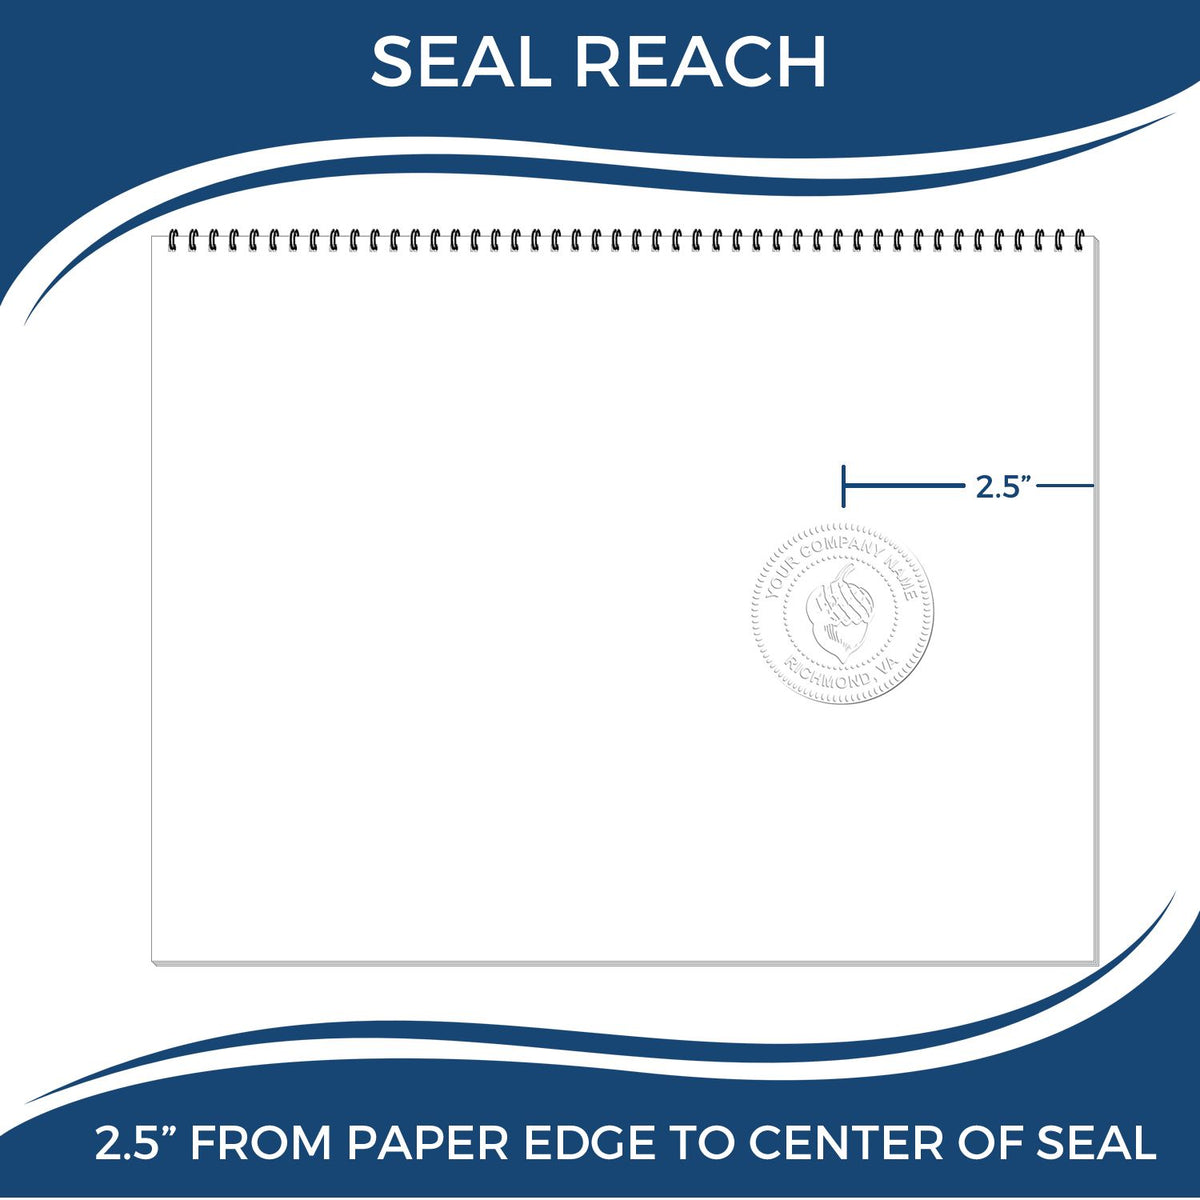 An infographic showing the seal reach which is represented by a ruler and a miniature seal image of the Long Reach South Dakota PE Seal